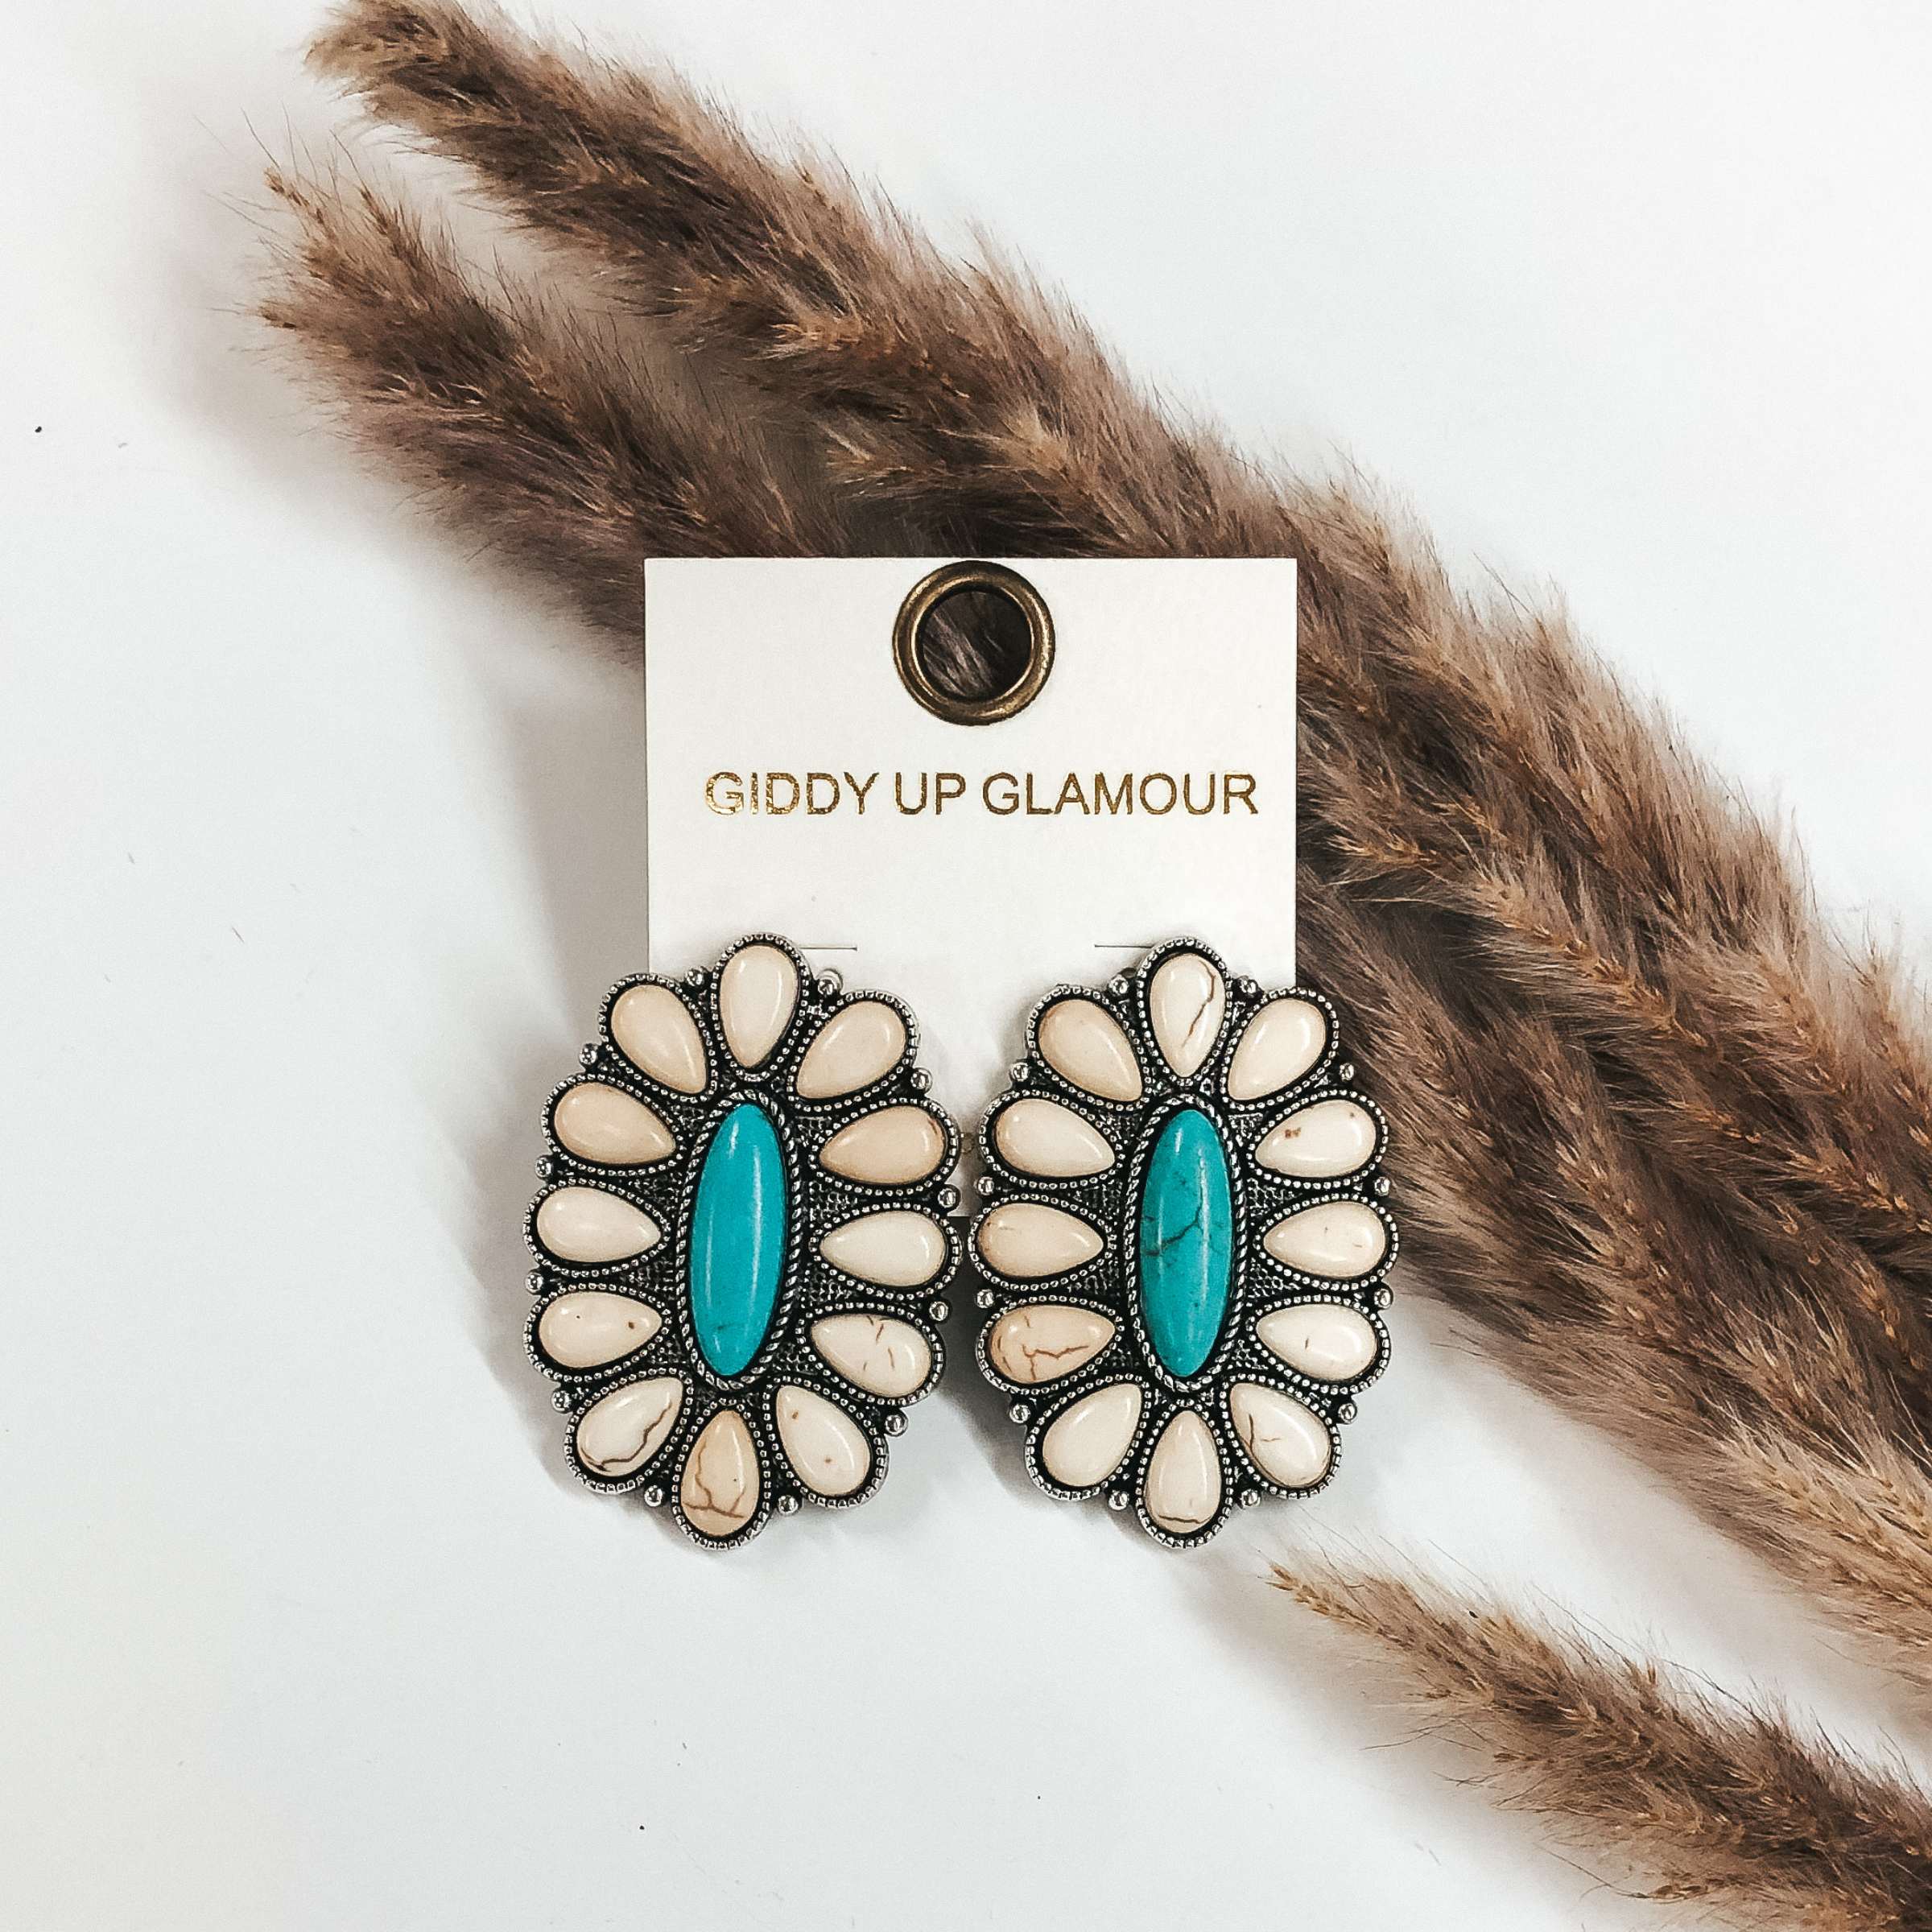 Oval cluster earrings with white stones. These earrings also include a center, oval turquoise stone. These earrings are pictured on a white background in front of brown pompous grass. 